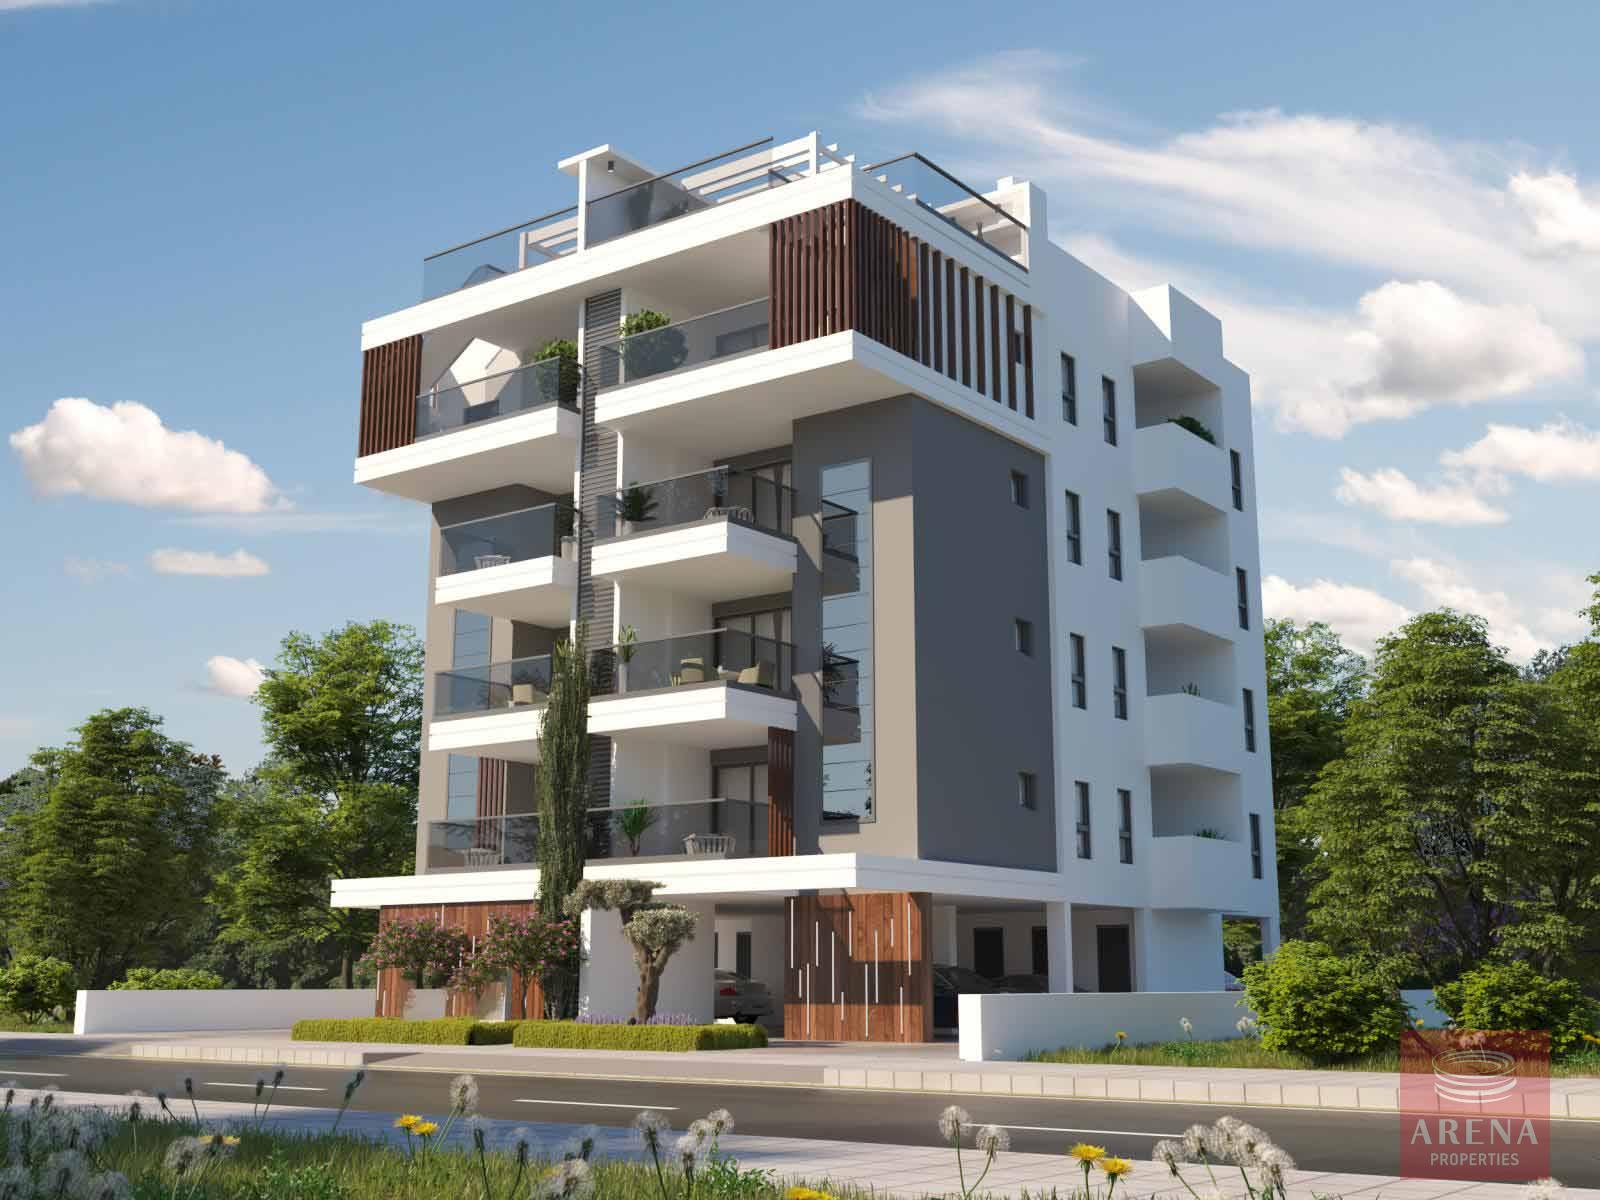 New Drosia Apartments for sale